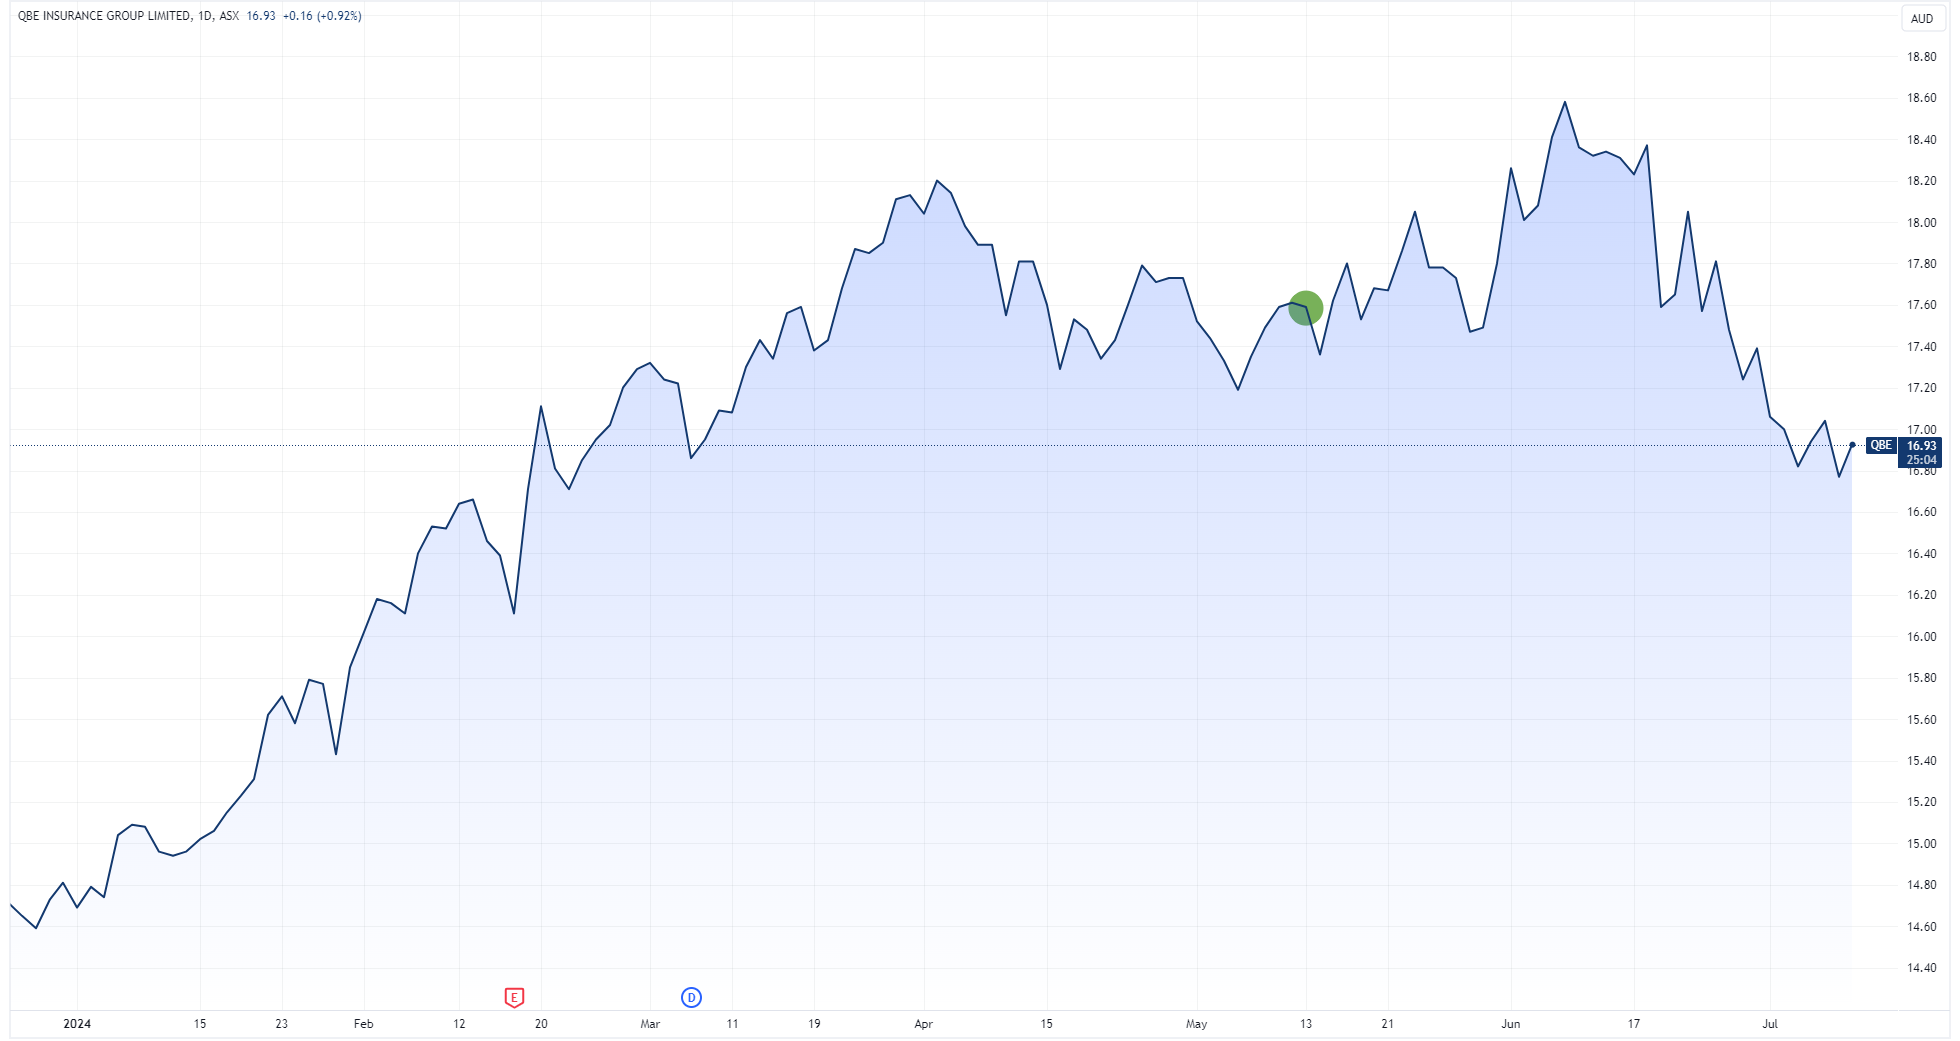 QBE price chart marked with June quarter insider buying (Source: Market Index)